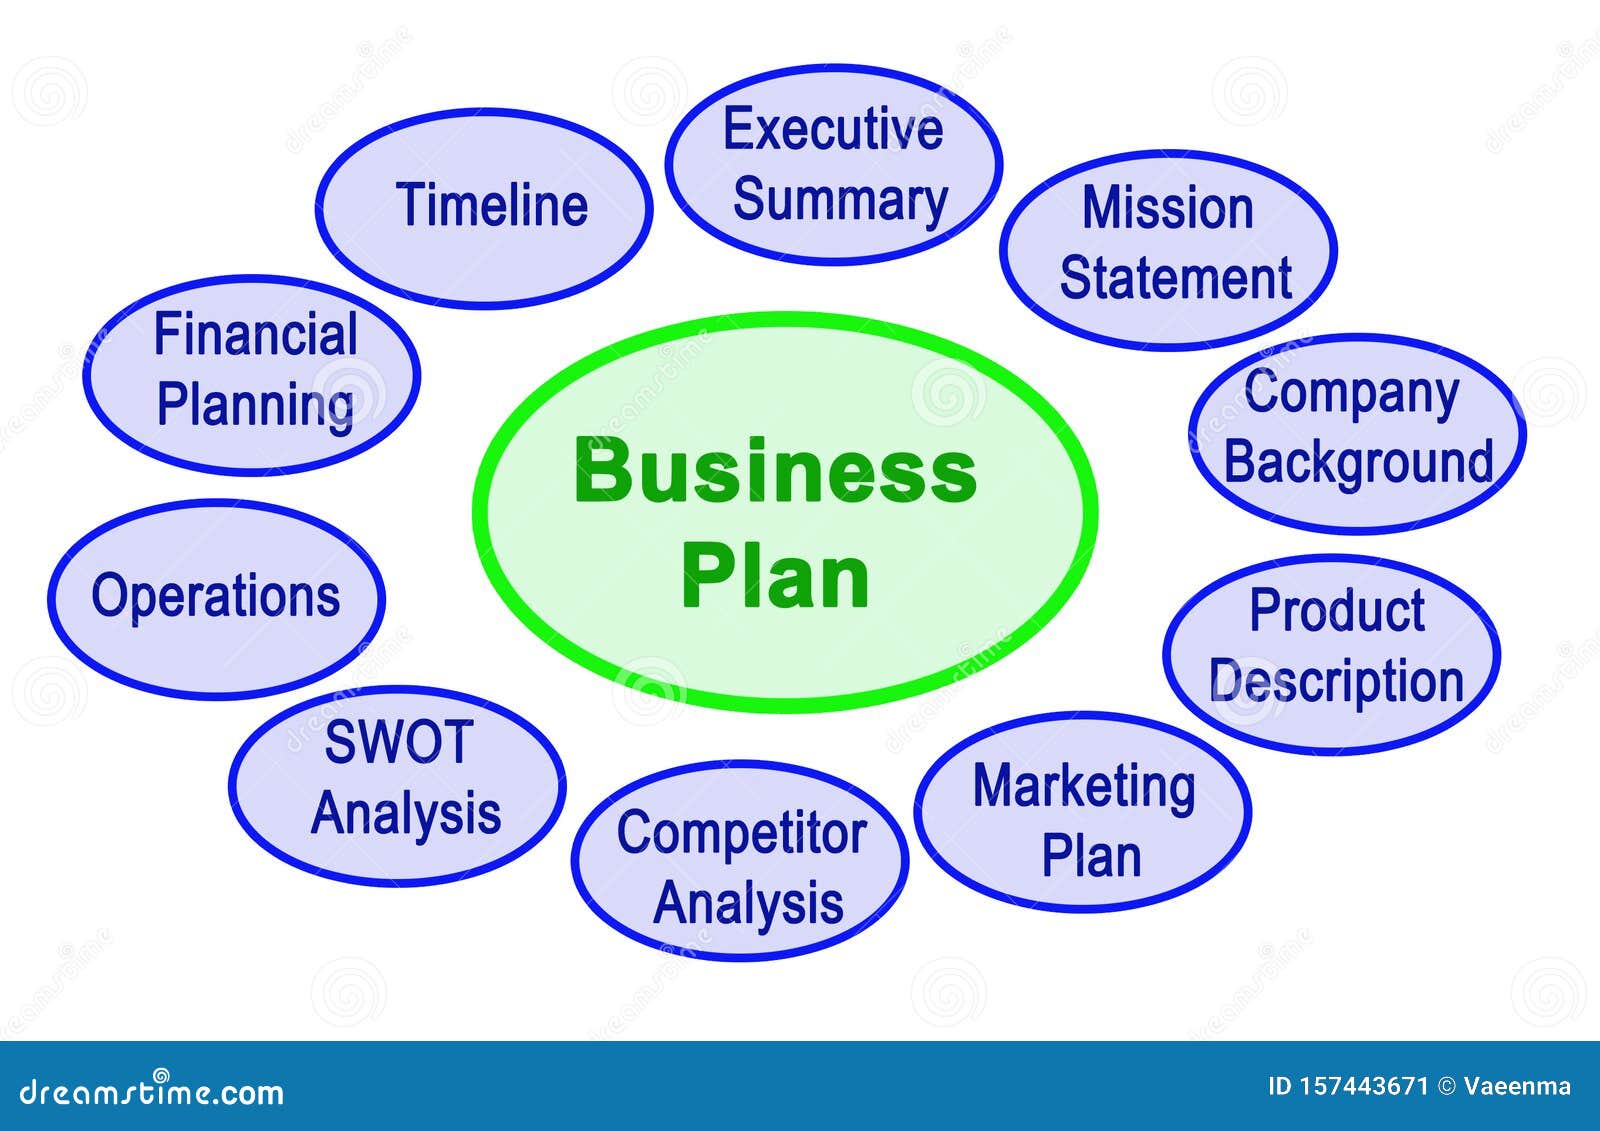 list the parts of a business plan